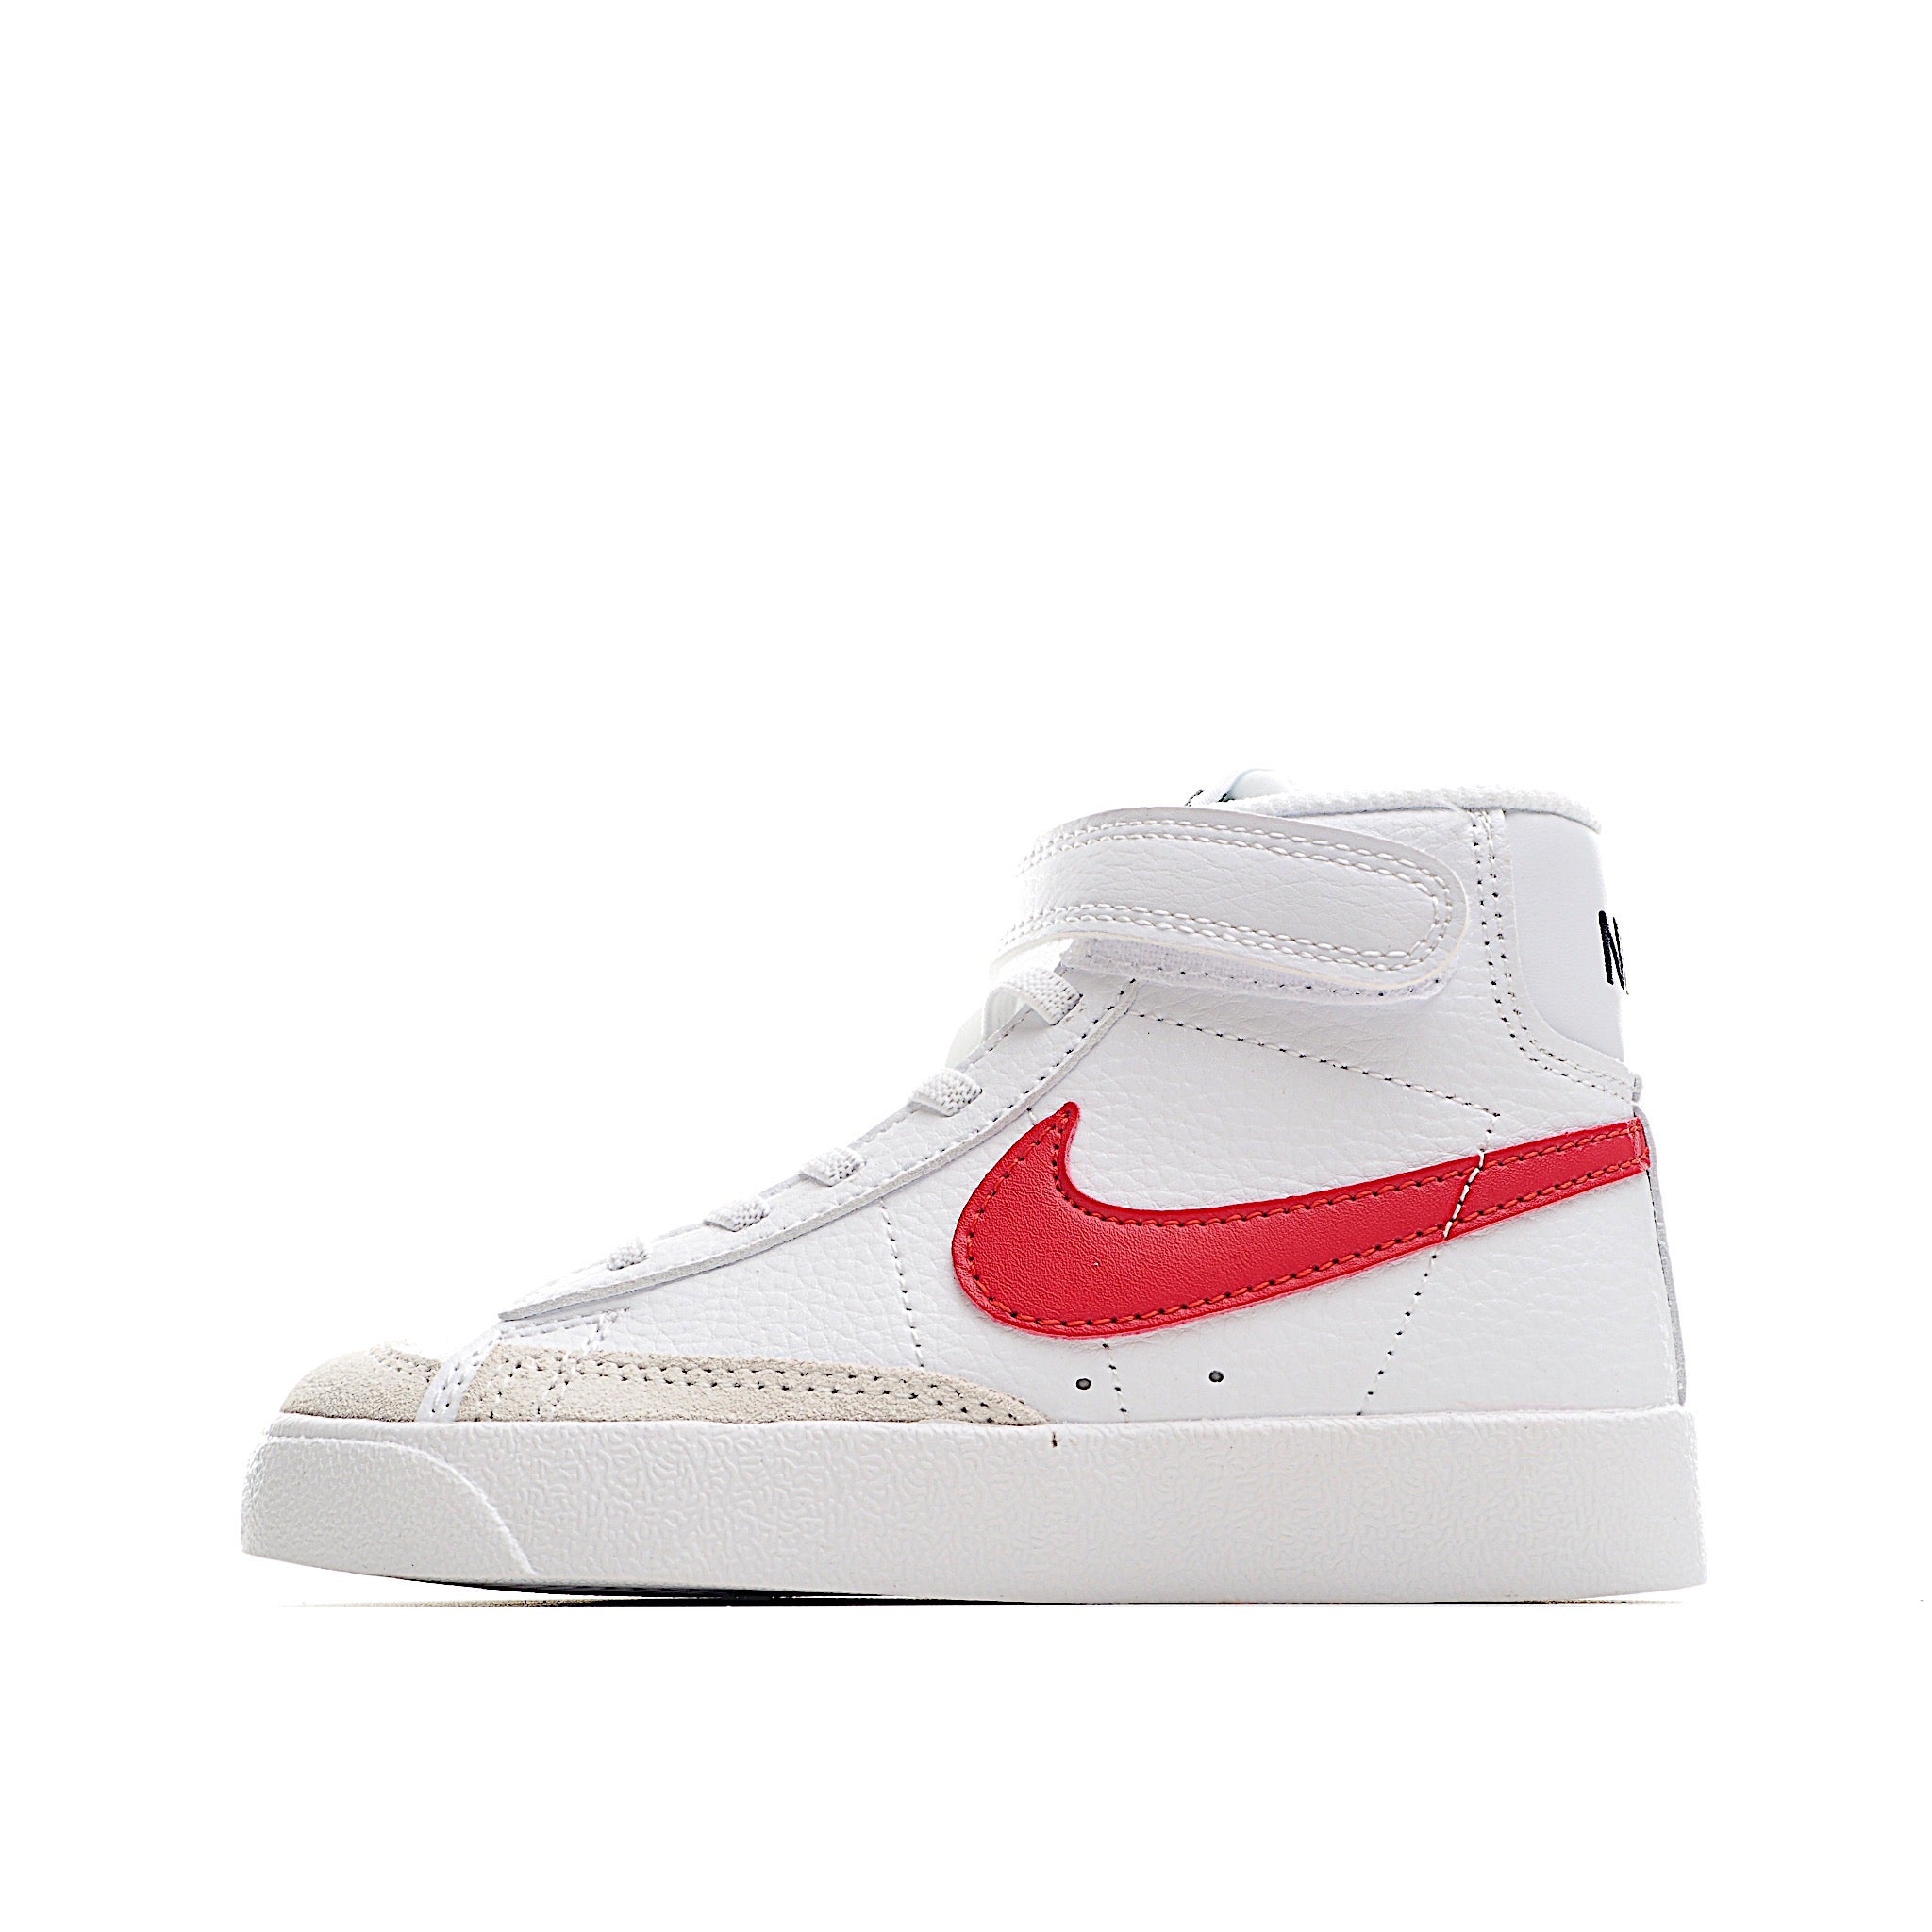 Nike high blazer blue and red shoes